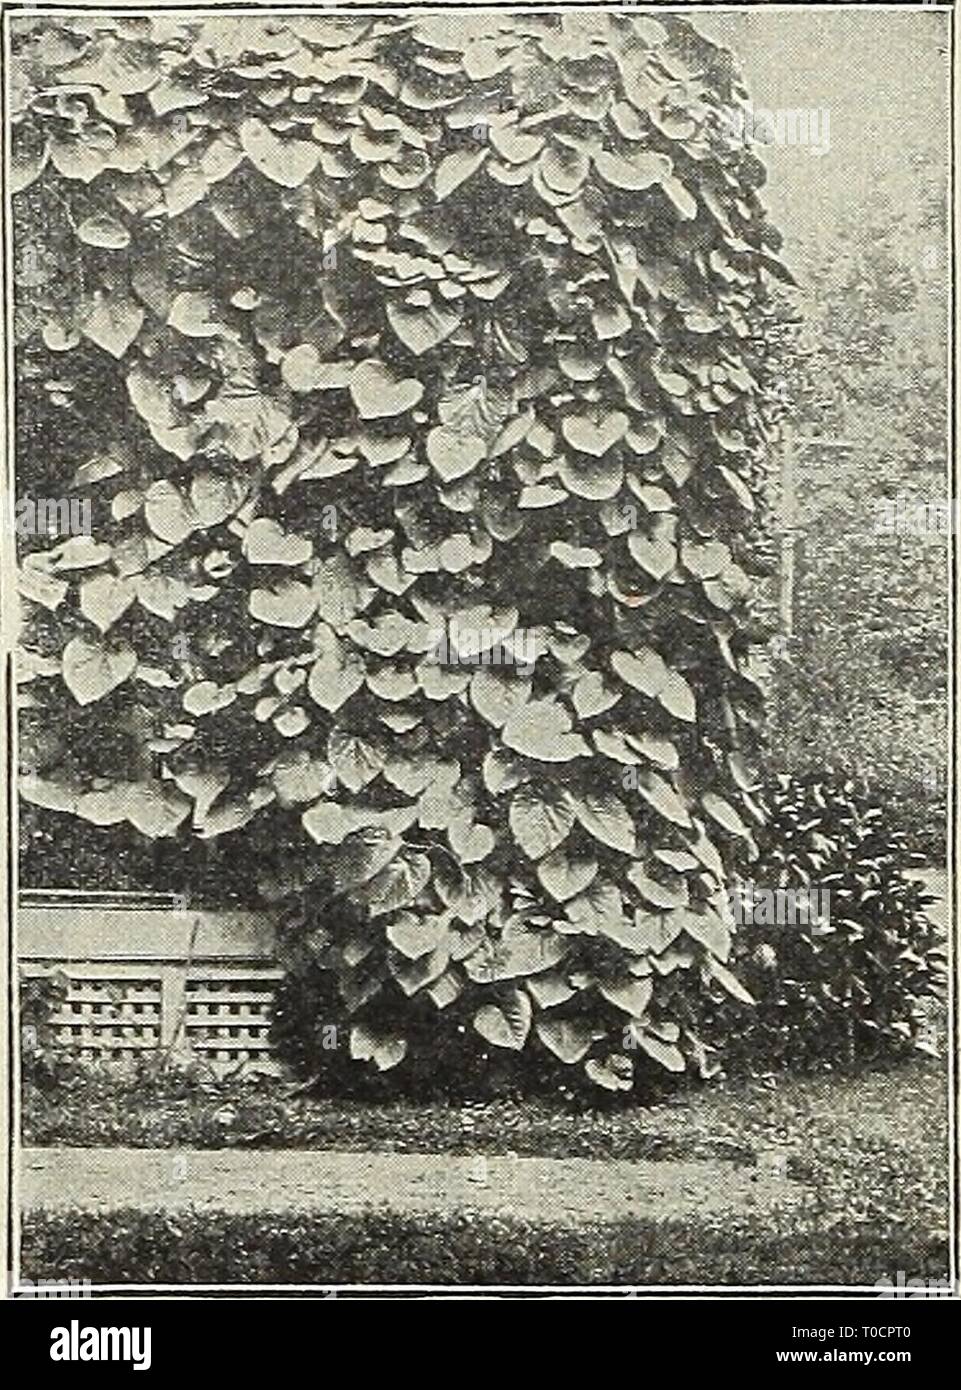 Dreer's garden book 1916 (1916) Dreer's garden book 1916 dreersgardenbook1916henr Year: 1916  Aristolochia Sipho Ampelopsis Veitchi Ampelopsis Veitchi. (Boston Ivy, or Japan Ivy.) The most popular climbing plant for cov- ering brick, stone or wooden walls, trees, etc.; when it becomes established it is of very rapid growth, and clings to the smooth- est surface with the tenacity of ivy; the fo- liage is of a rich olive green during the summer, changing to various shades of bright crimson and scarlet in the fall. In planting Ampelopsis of all kinds, the plants, if still in a dormant condition,  Stock Photo